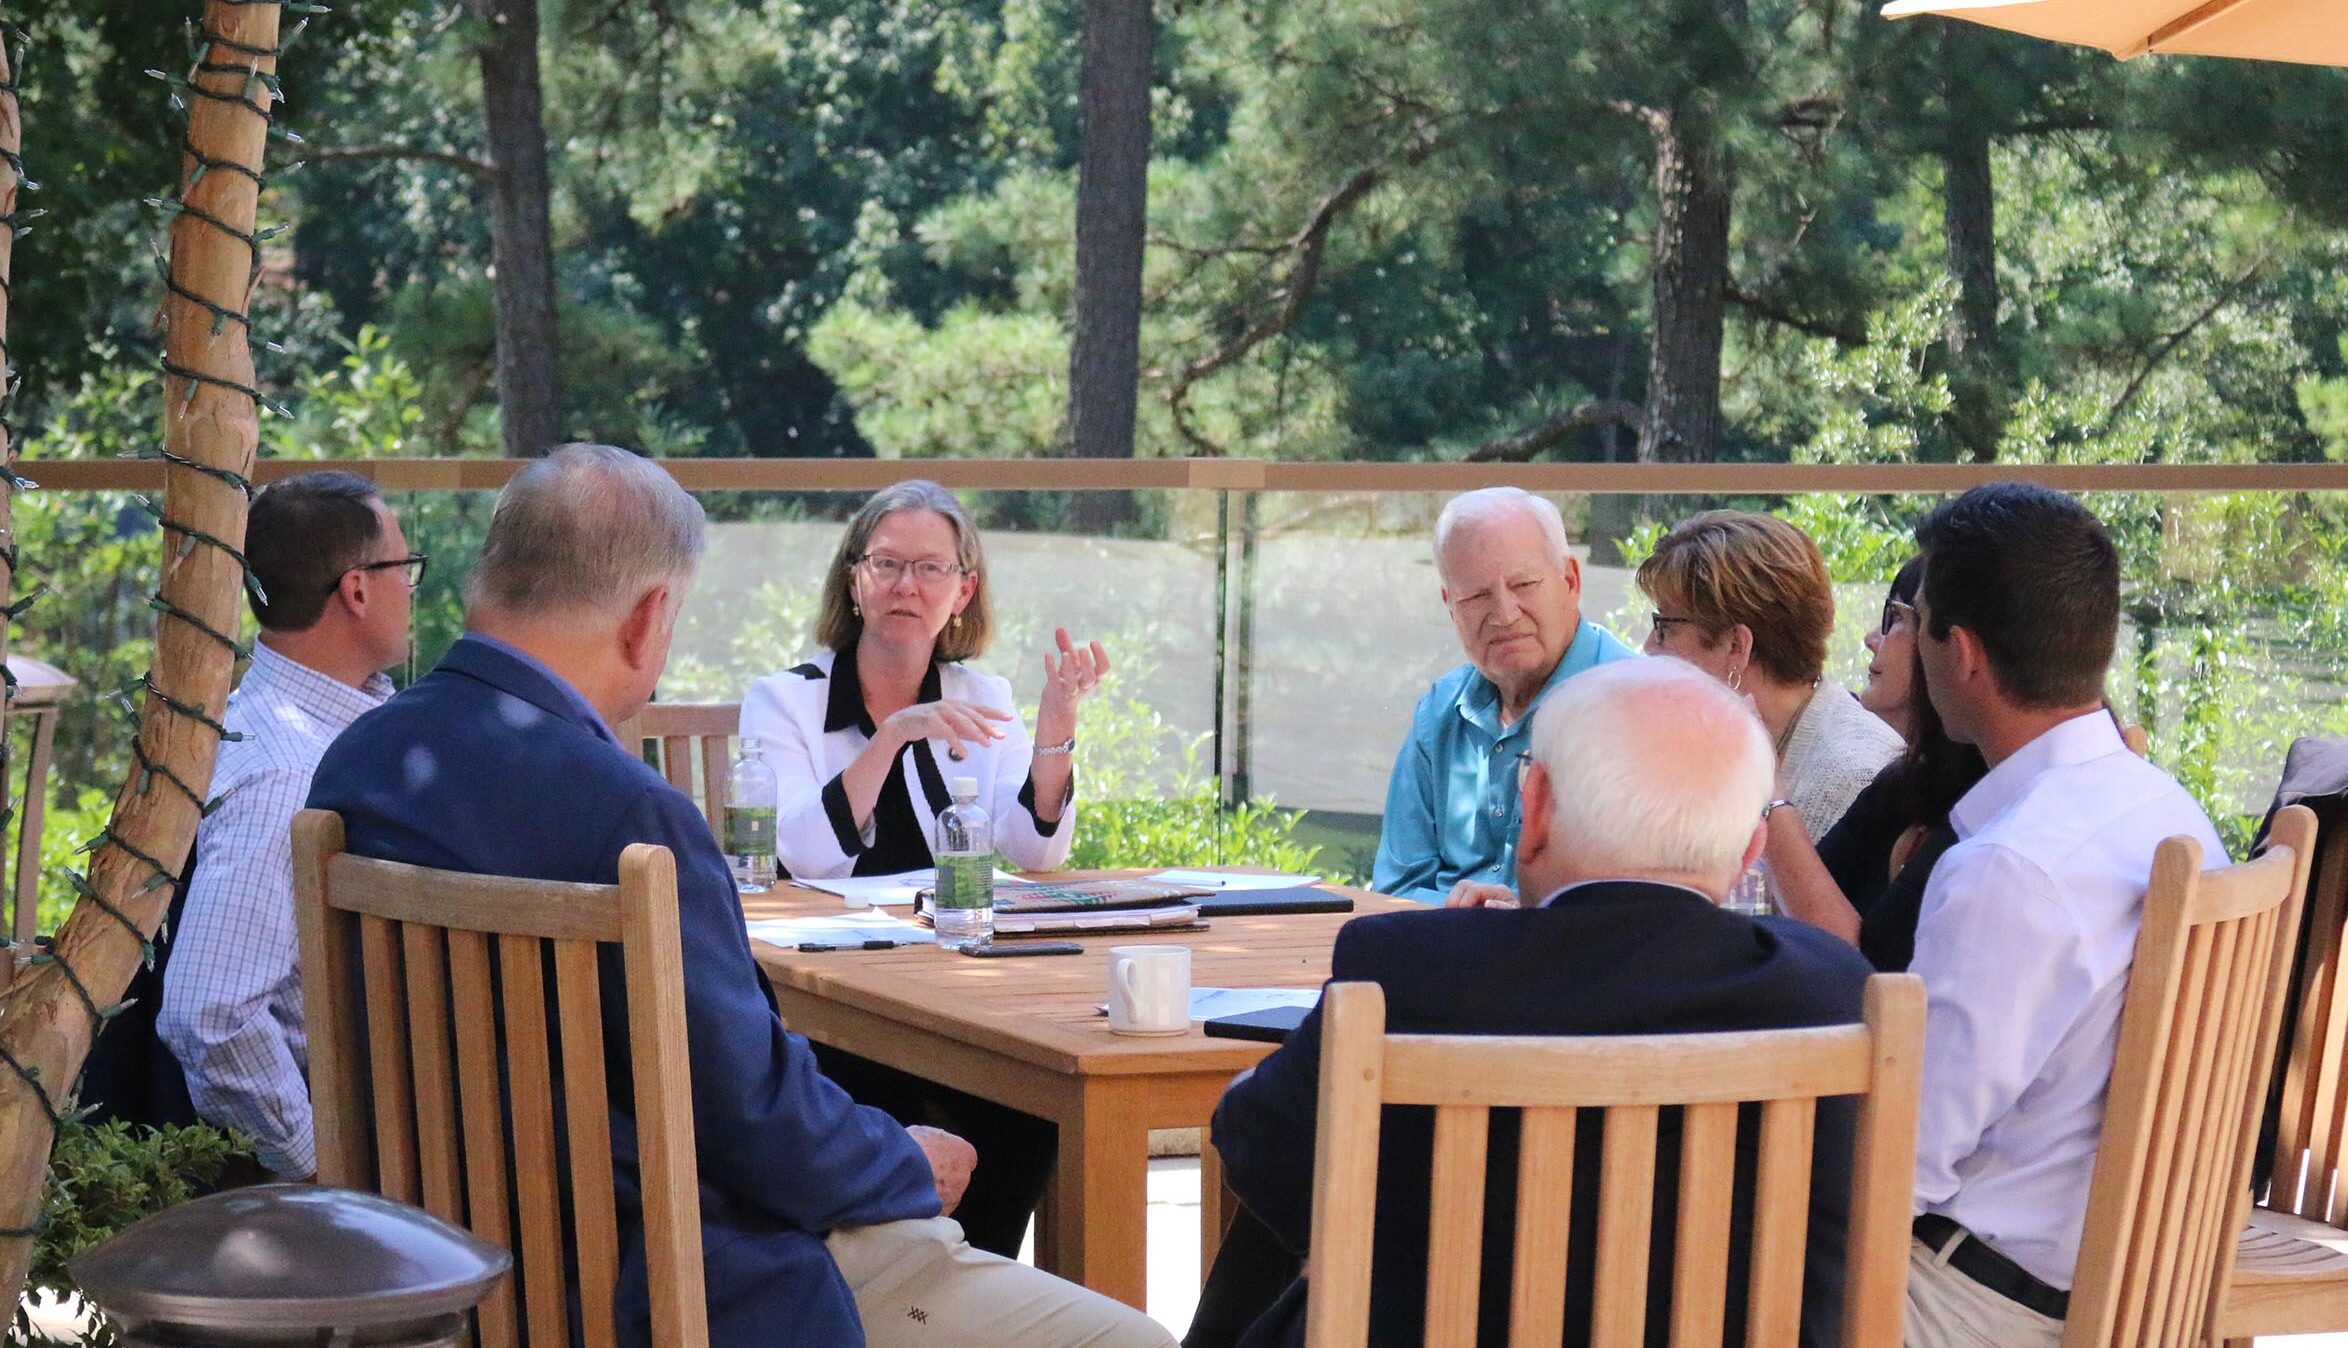 education and policy leaders in conversation around a table outside